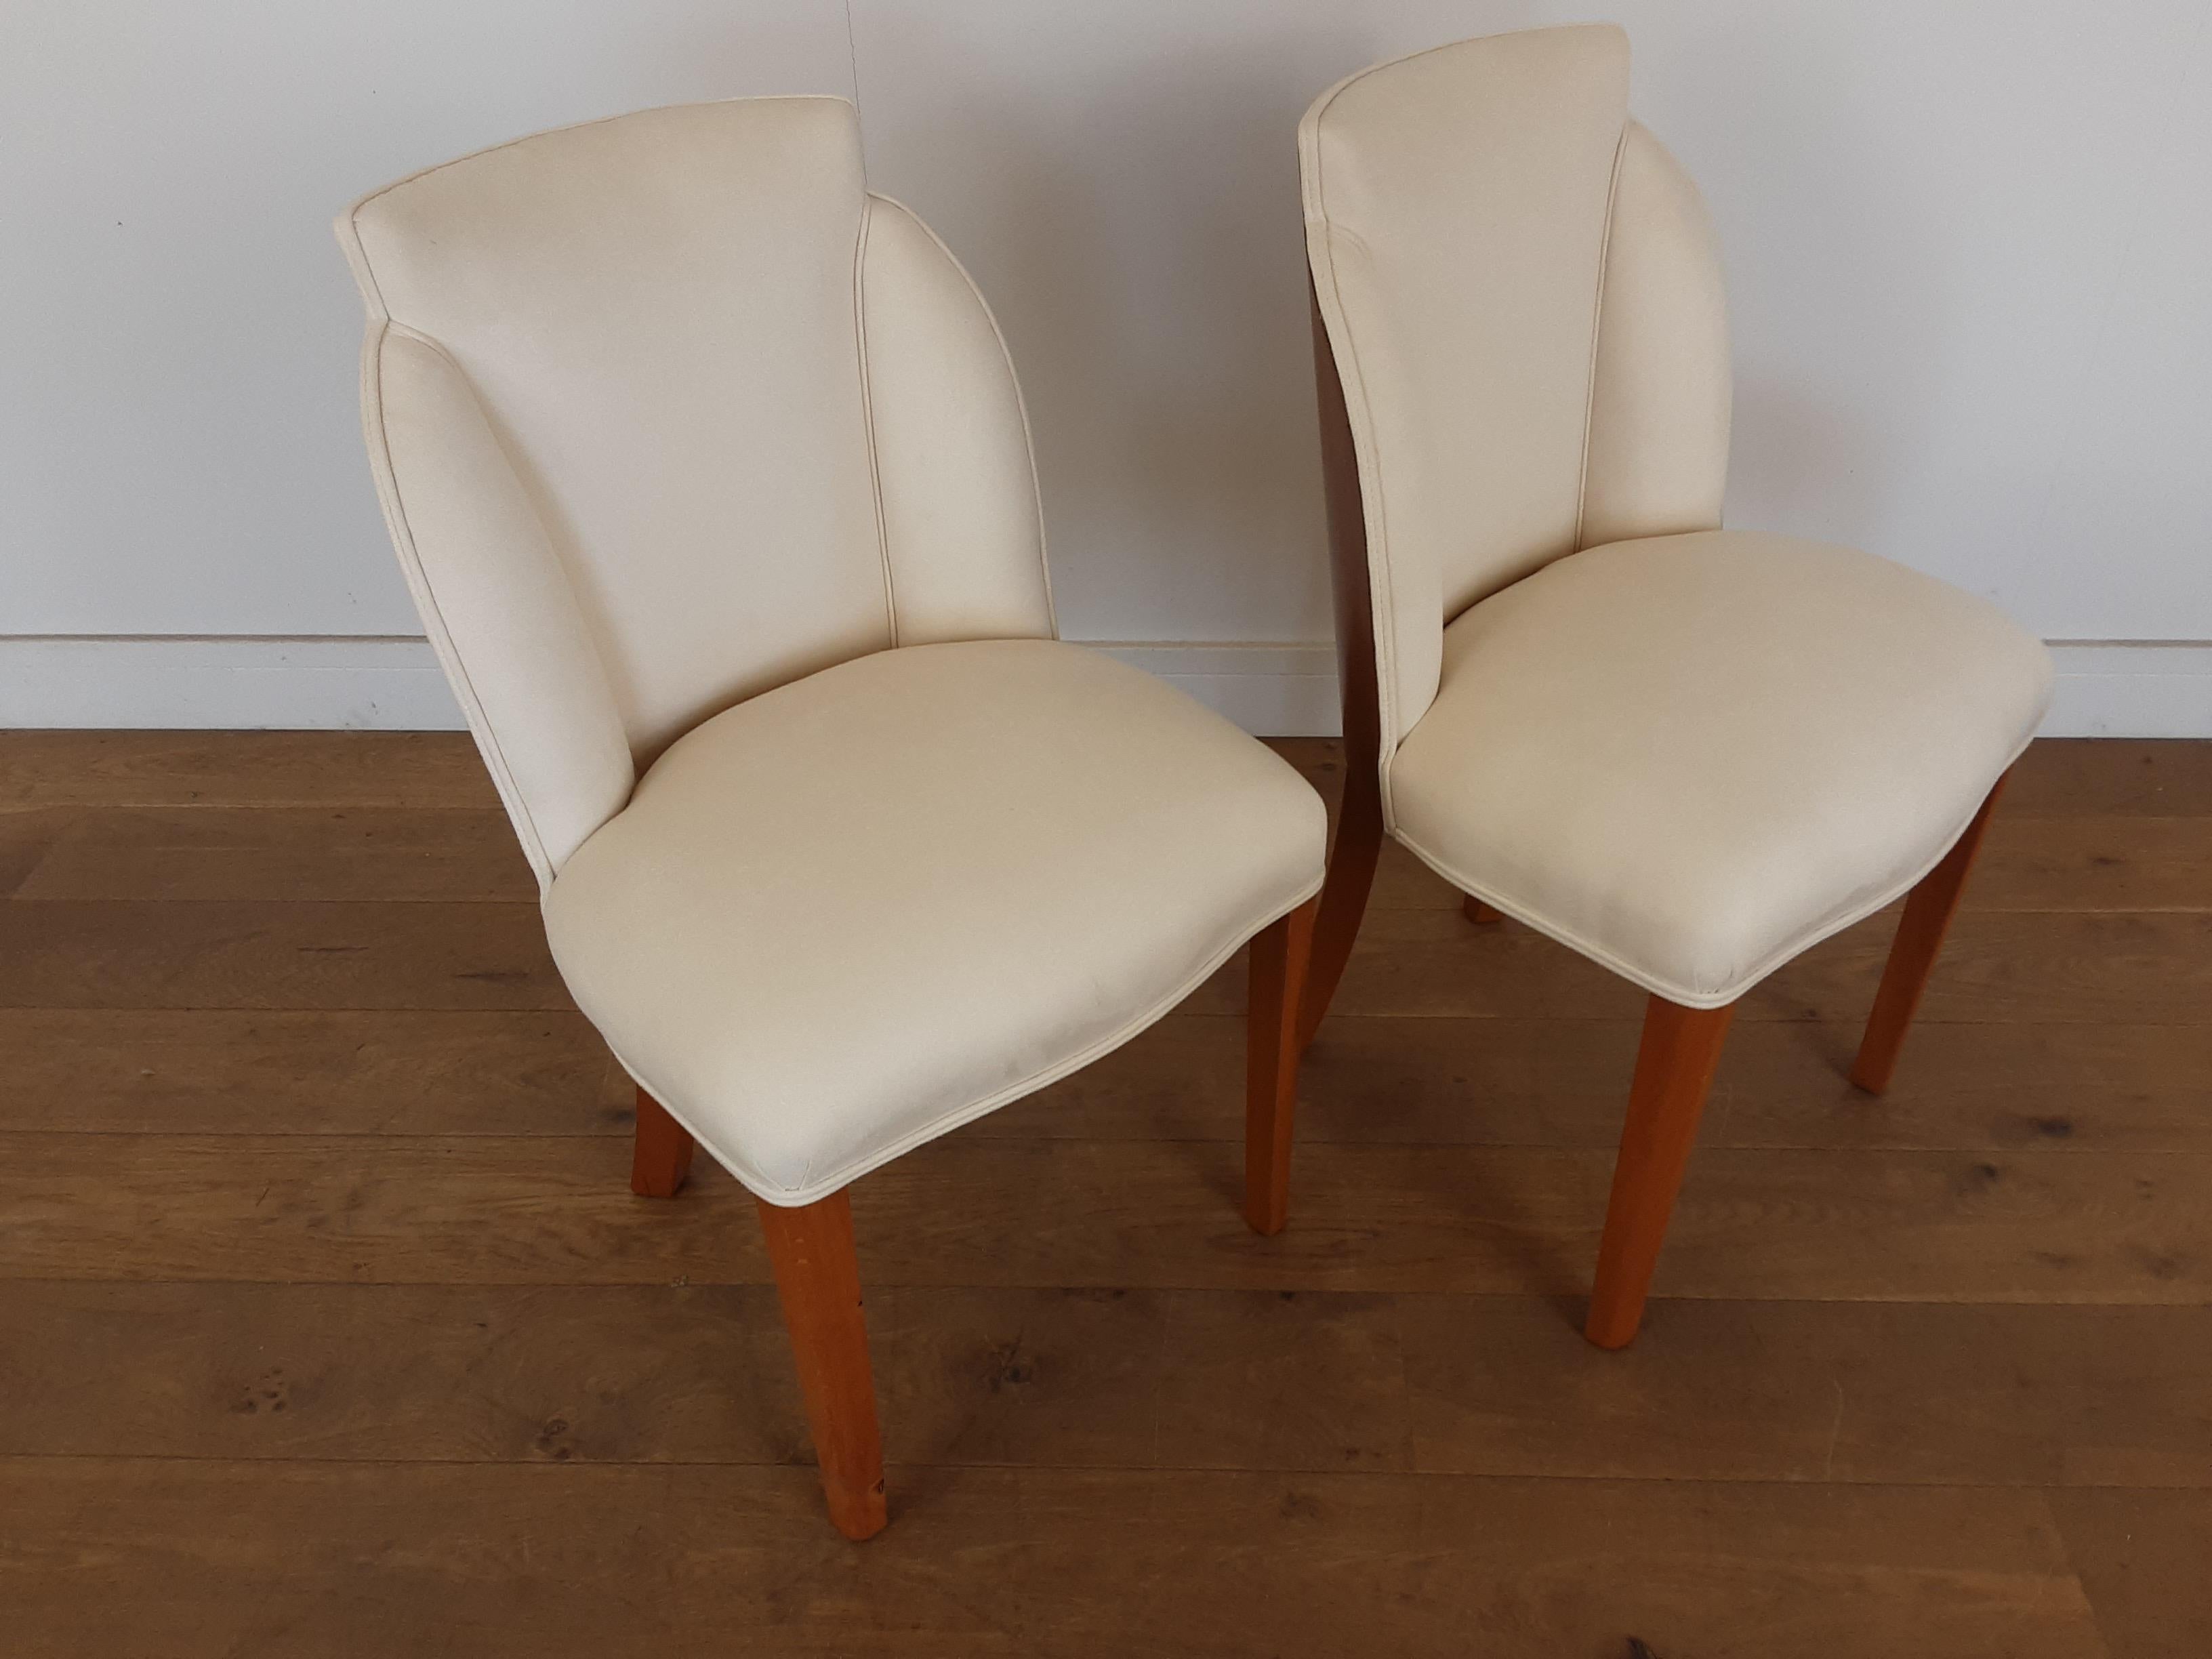 A pair of cloud back chairs in walnut all professionally re polished to an original finish, also professionally re upholstered in an ivory faux suede.
A classic design by Harry and Lou Epstein.
Measures: 85 cm H, 48 cm W, 48 cm D, seat height is